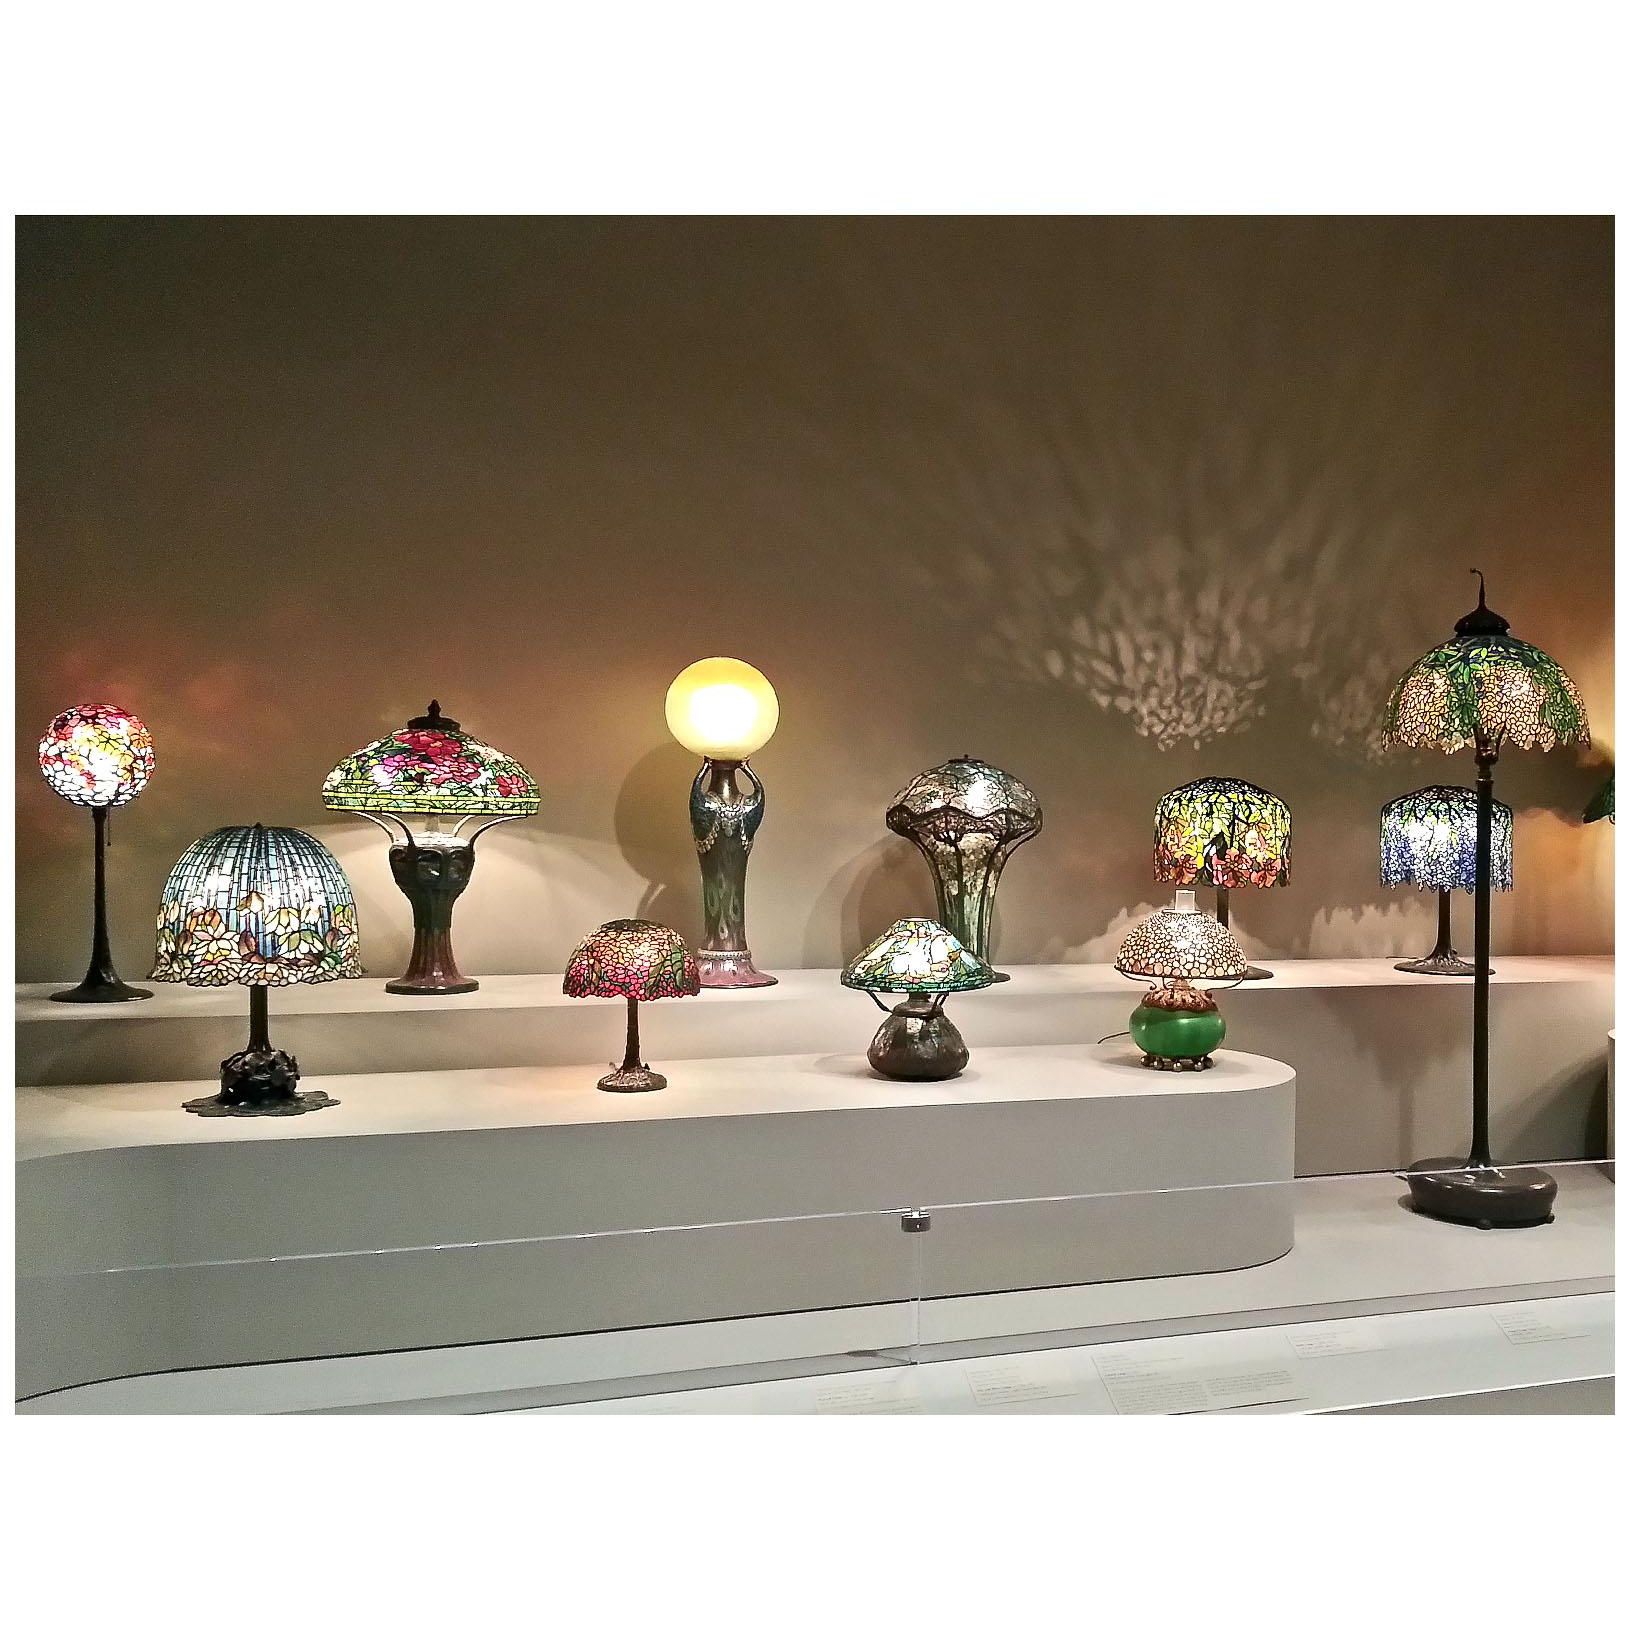 Collection of Tiffany Lamps. 1900-1920. Virginia Museum of Fine Arts